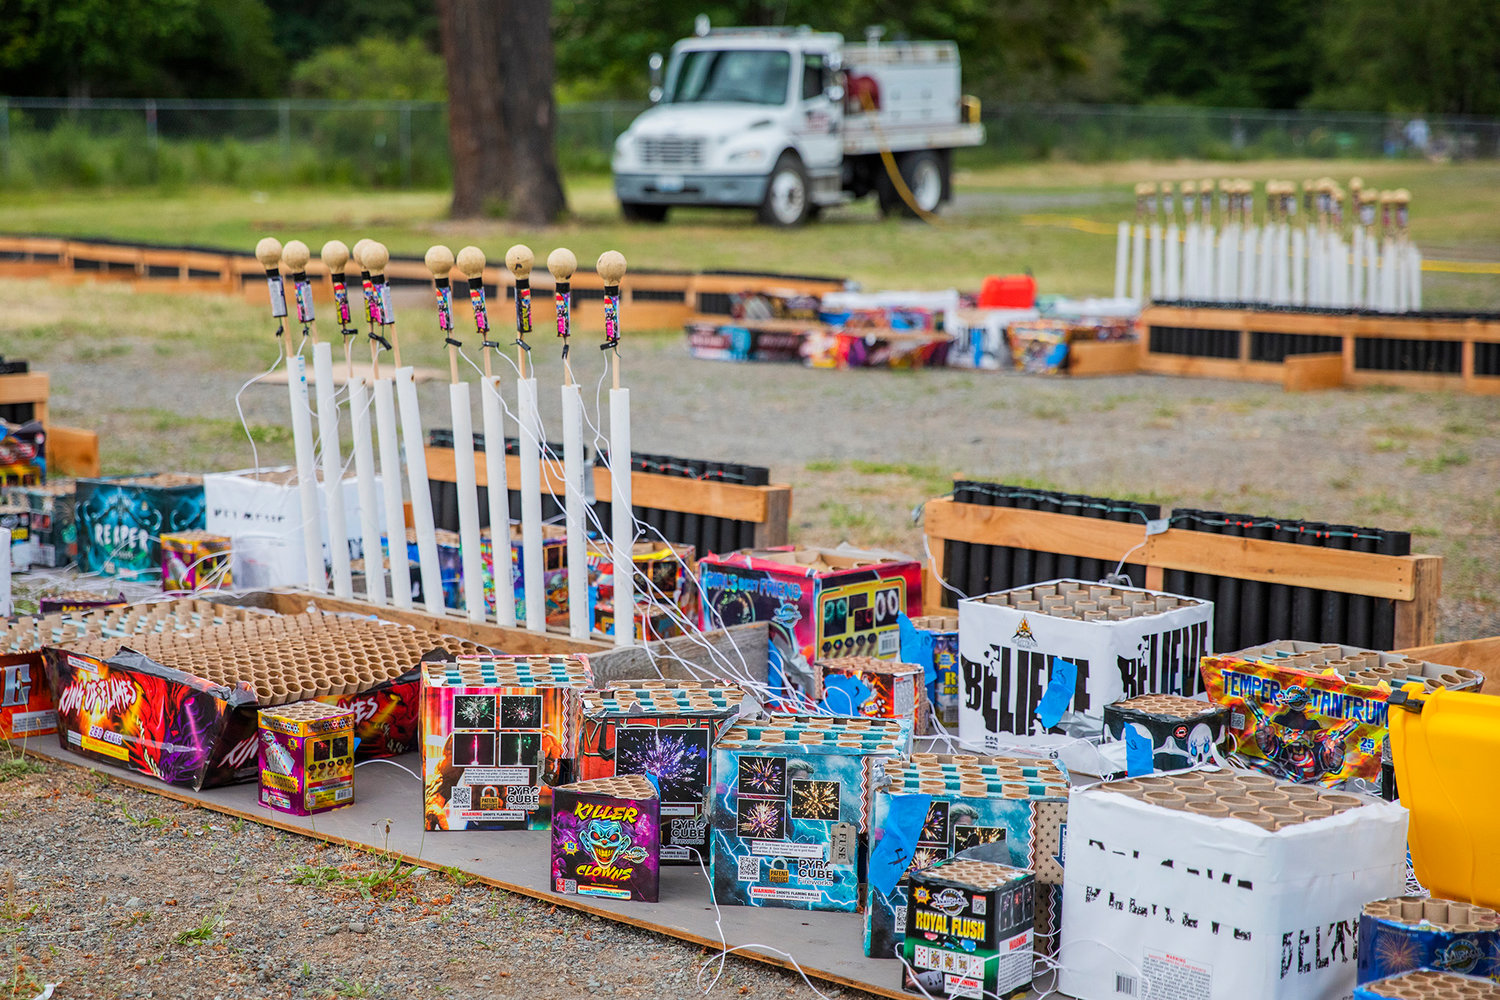 Wires connect fireworks to charges ready for a show Saturday evening in Packwood.